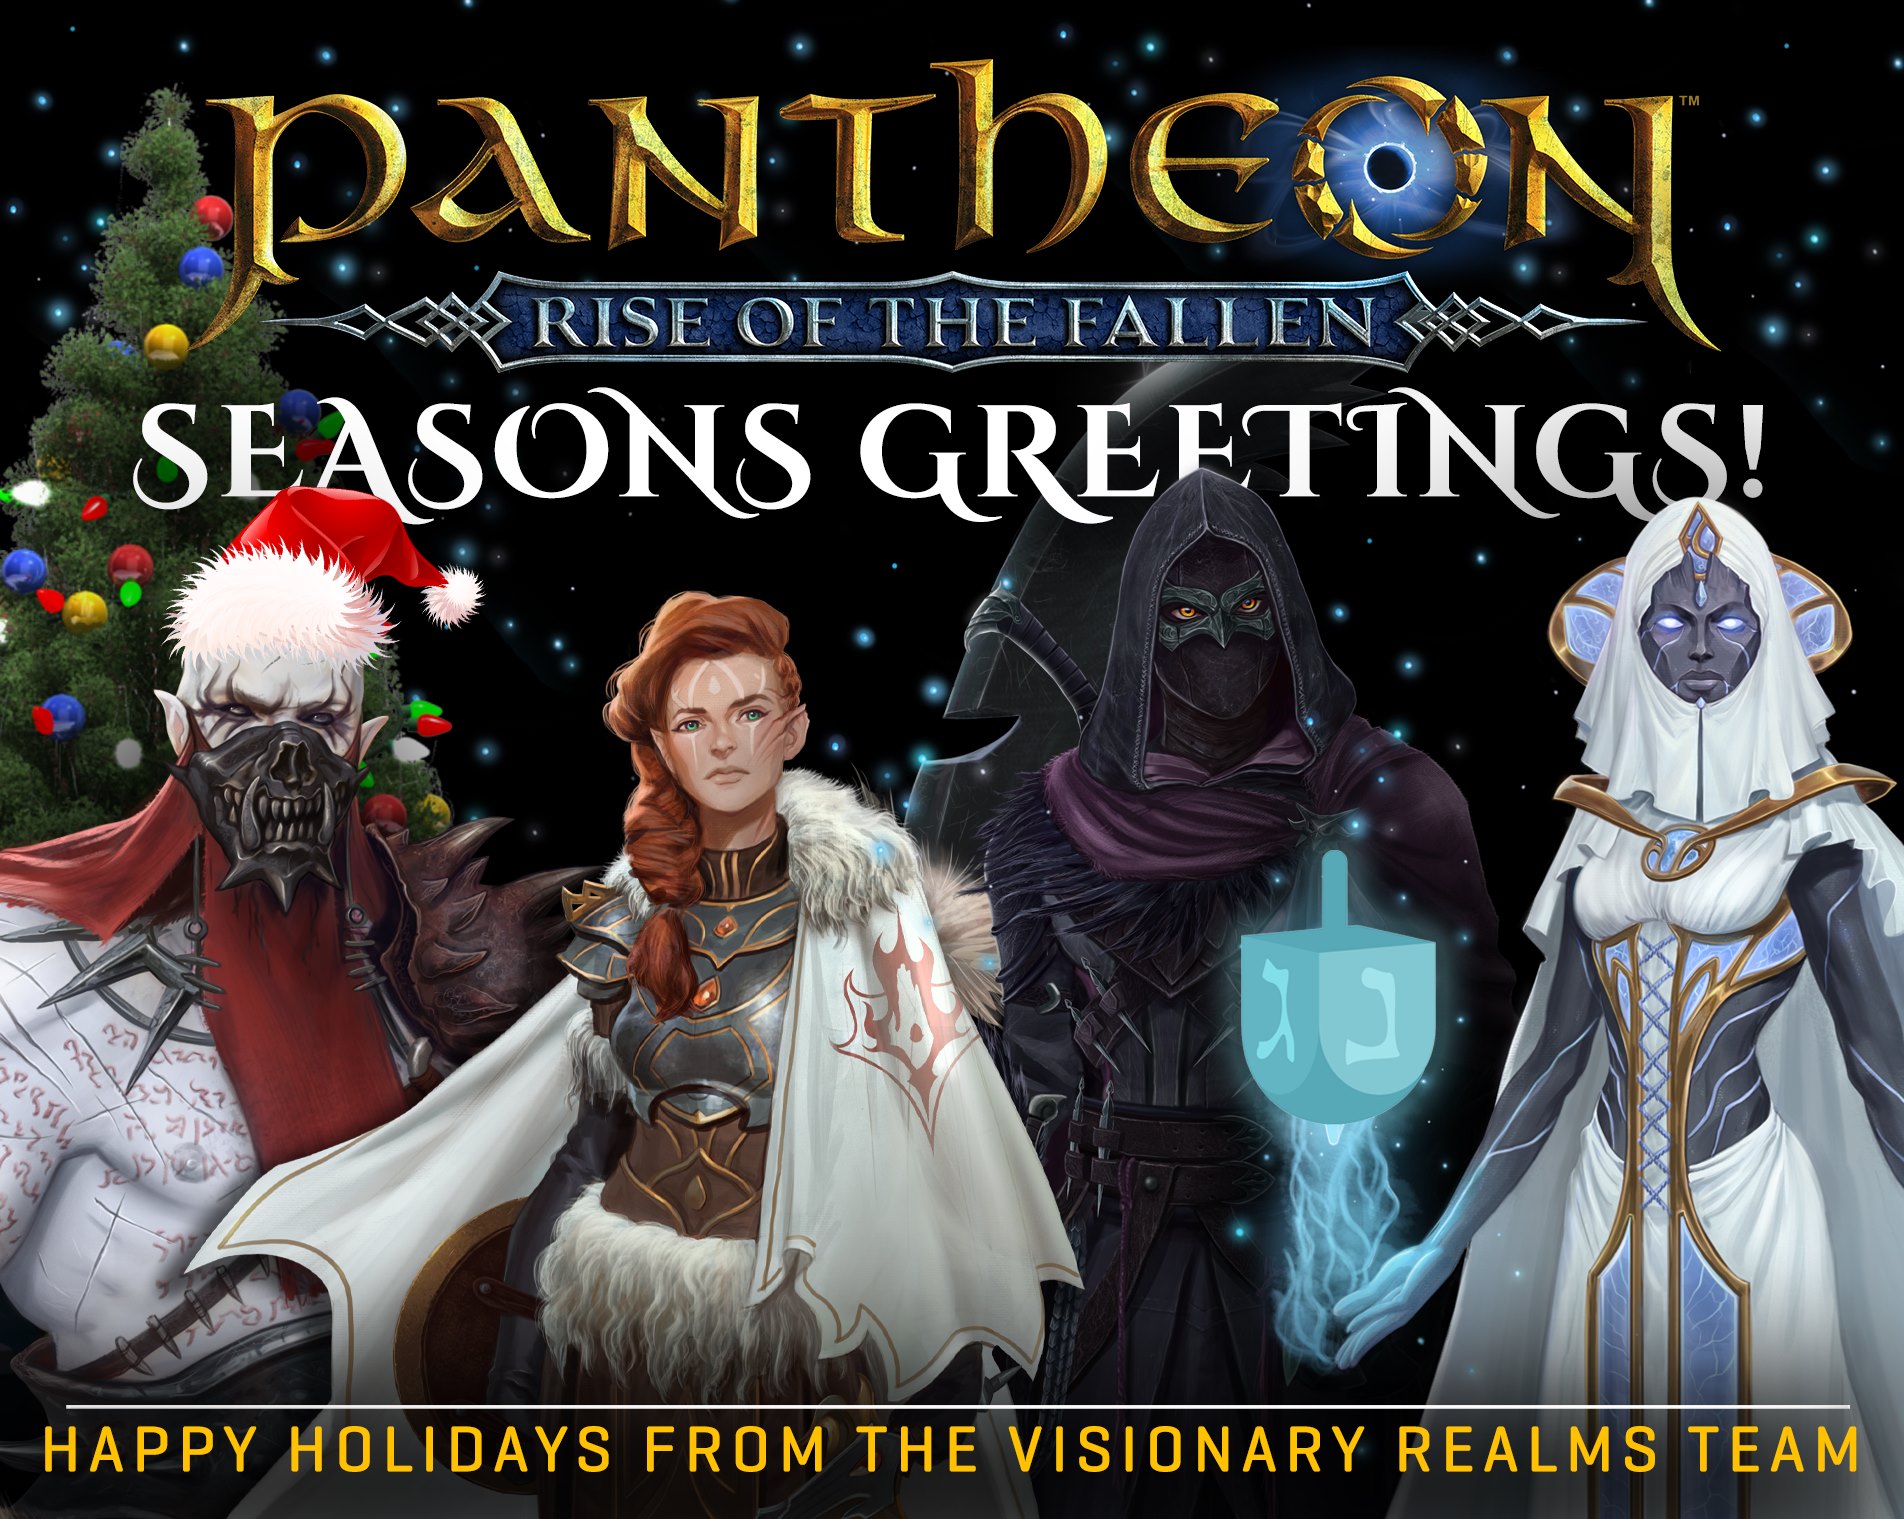 2020-Dec 24: Seasons Greetings promo with modified concept art of (from left to right) Arak'amel Dhaun, Thaeolyn Greyborne, Janis Sova, and Bel-Iris